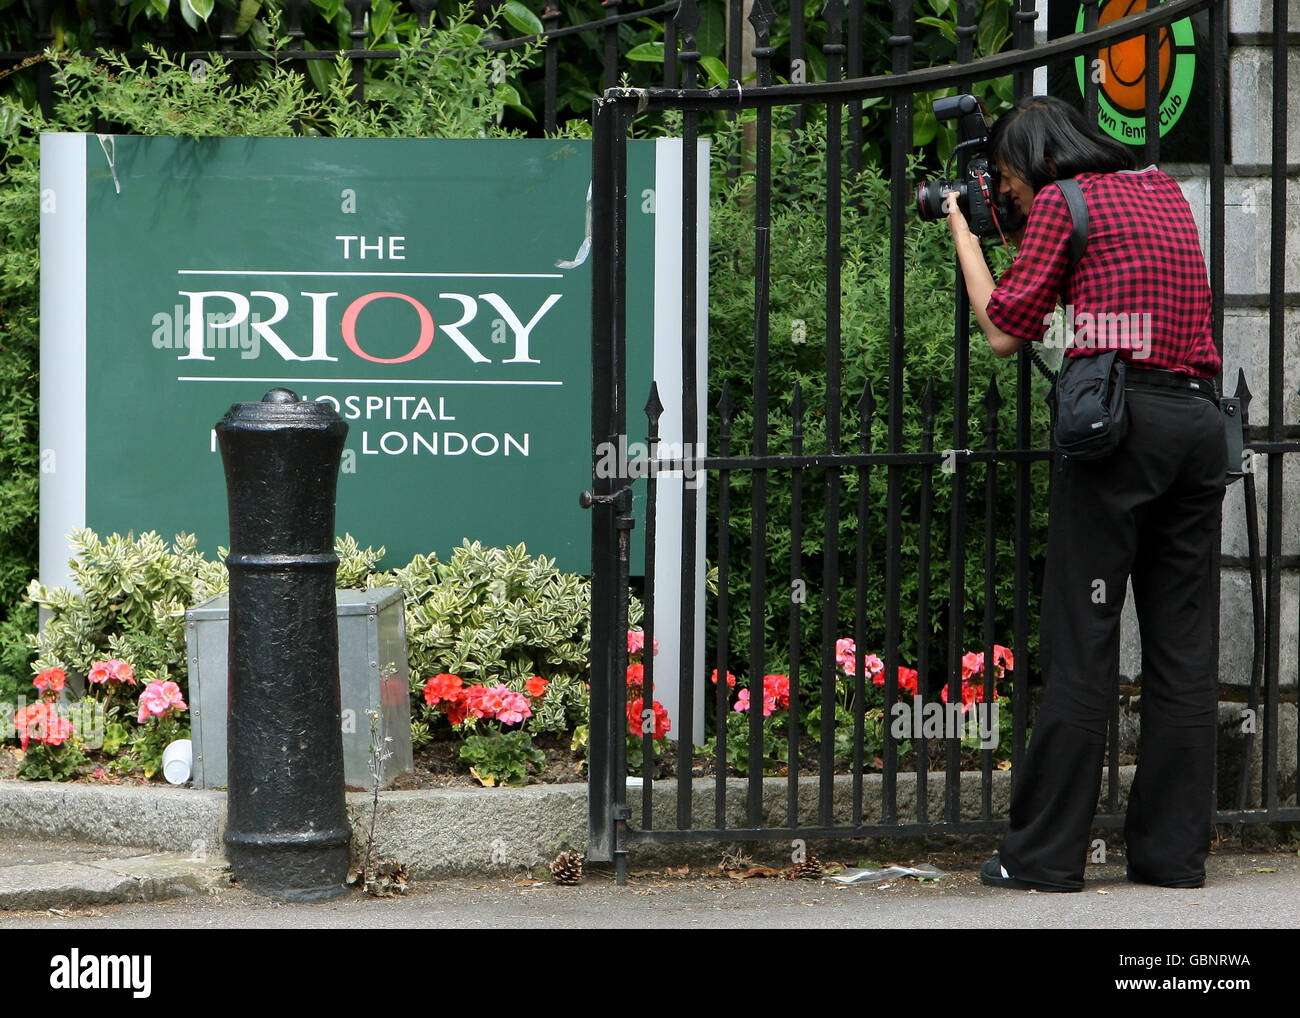 A photographer outside the entrance to The Priory Hospital in north London, where Susan Boyle has been admitted following the final of 'Britain's Got Talent.' Stock Photo